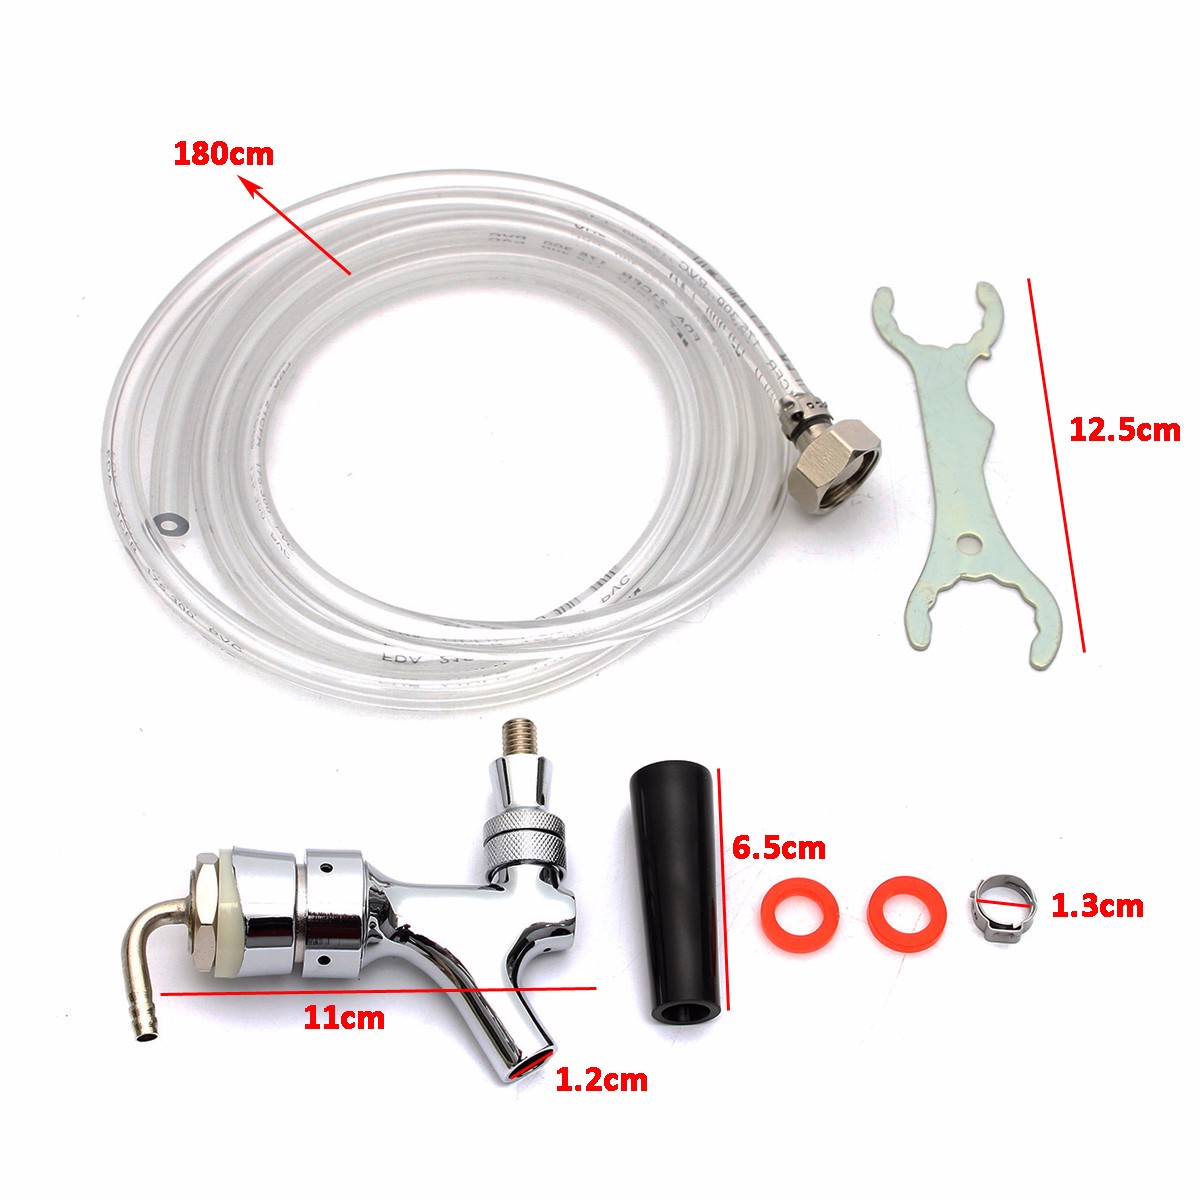 Draft Beer Tower Rebuild Kit with Shank Beer Faucet Hose Wrench